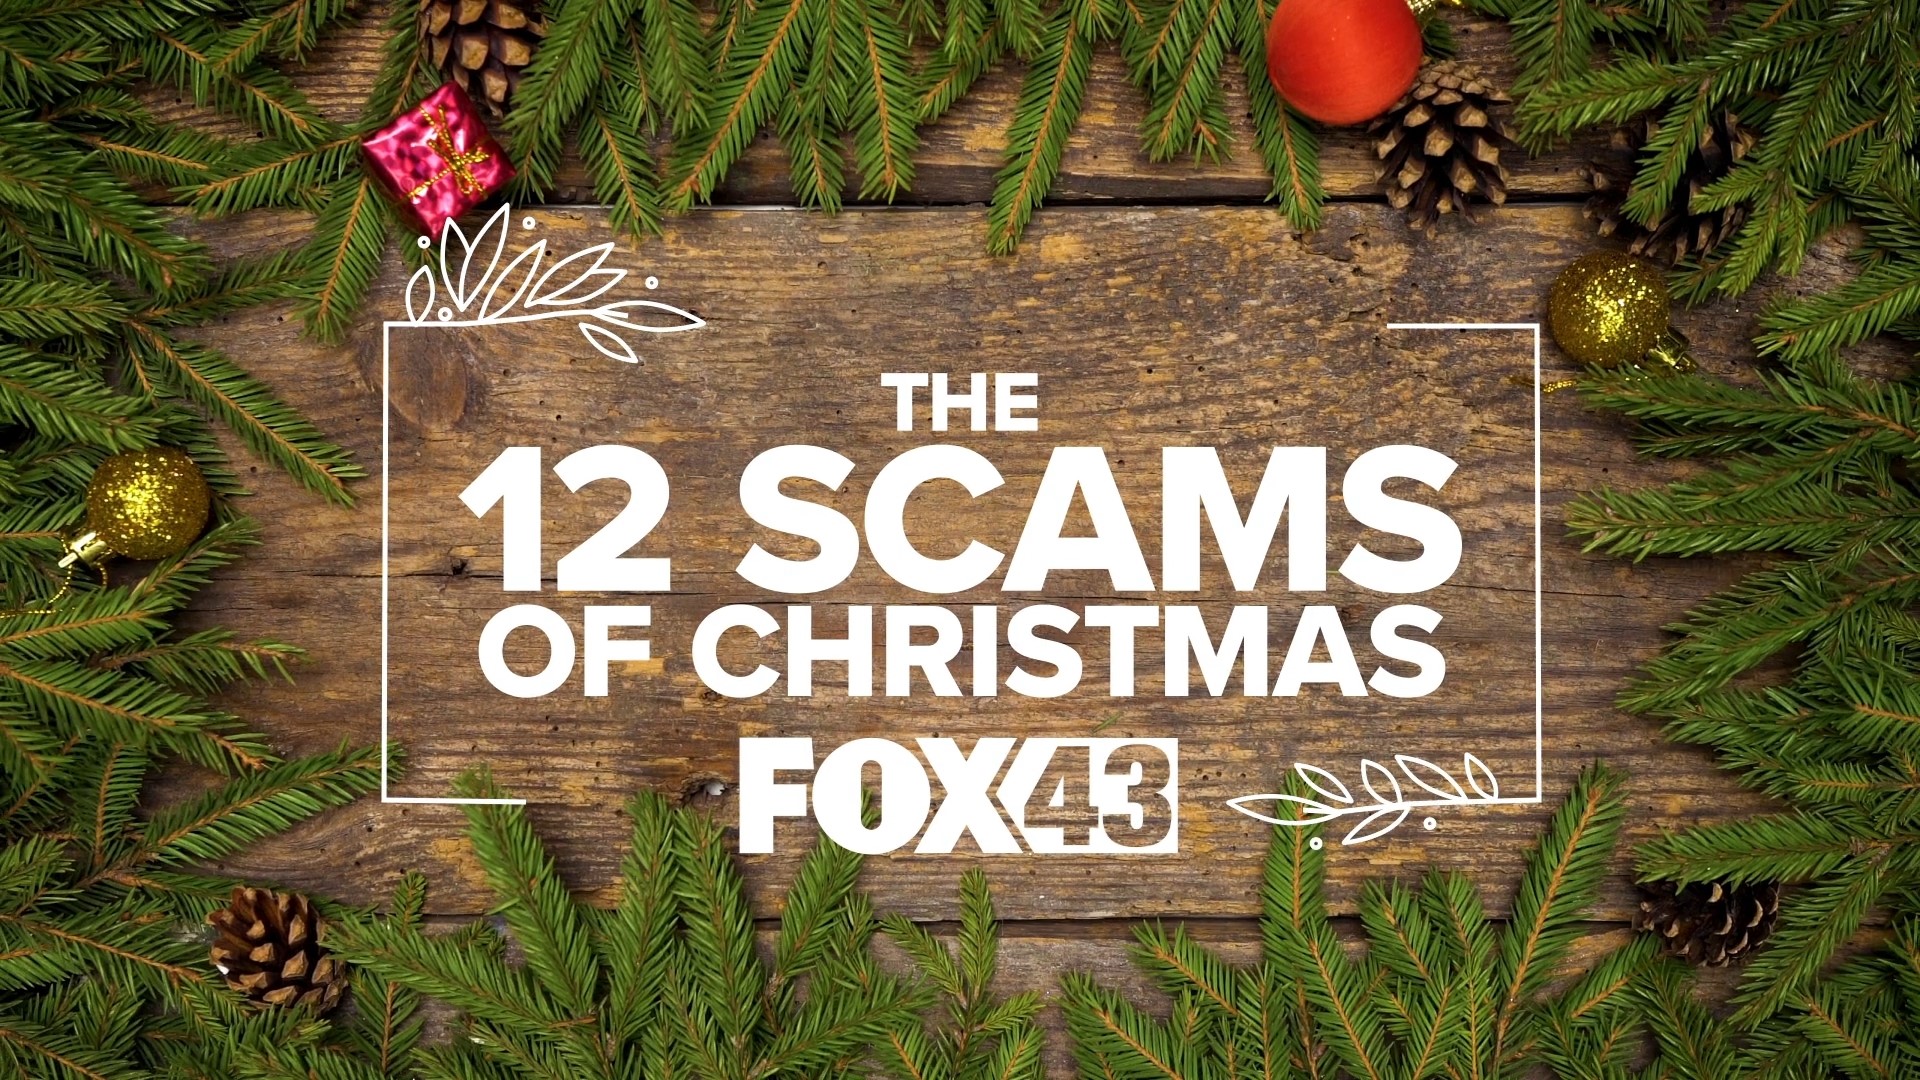 Misleading social media ads made the list of 12 scams of Christmas.